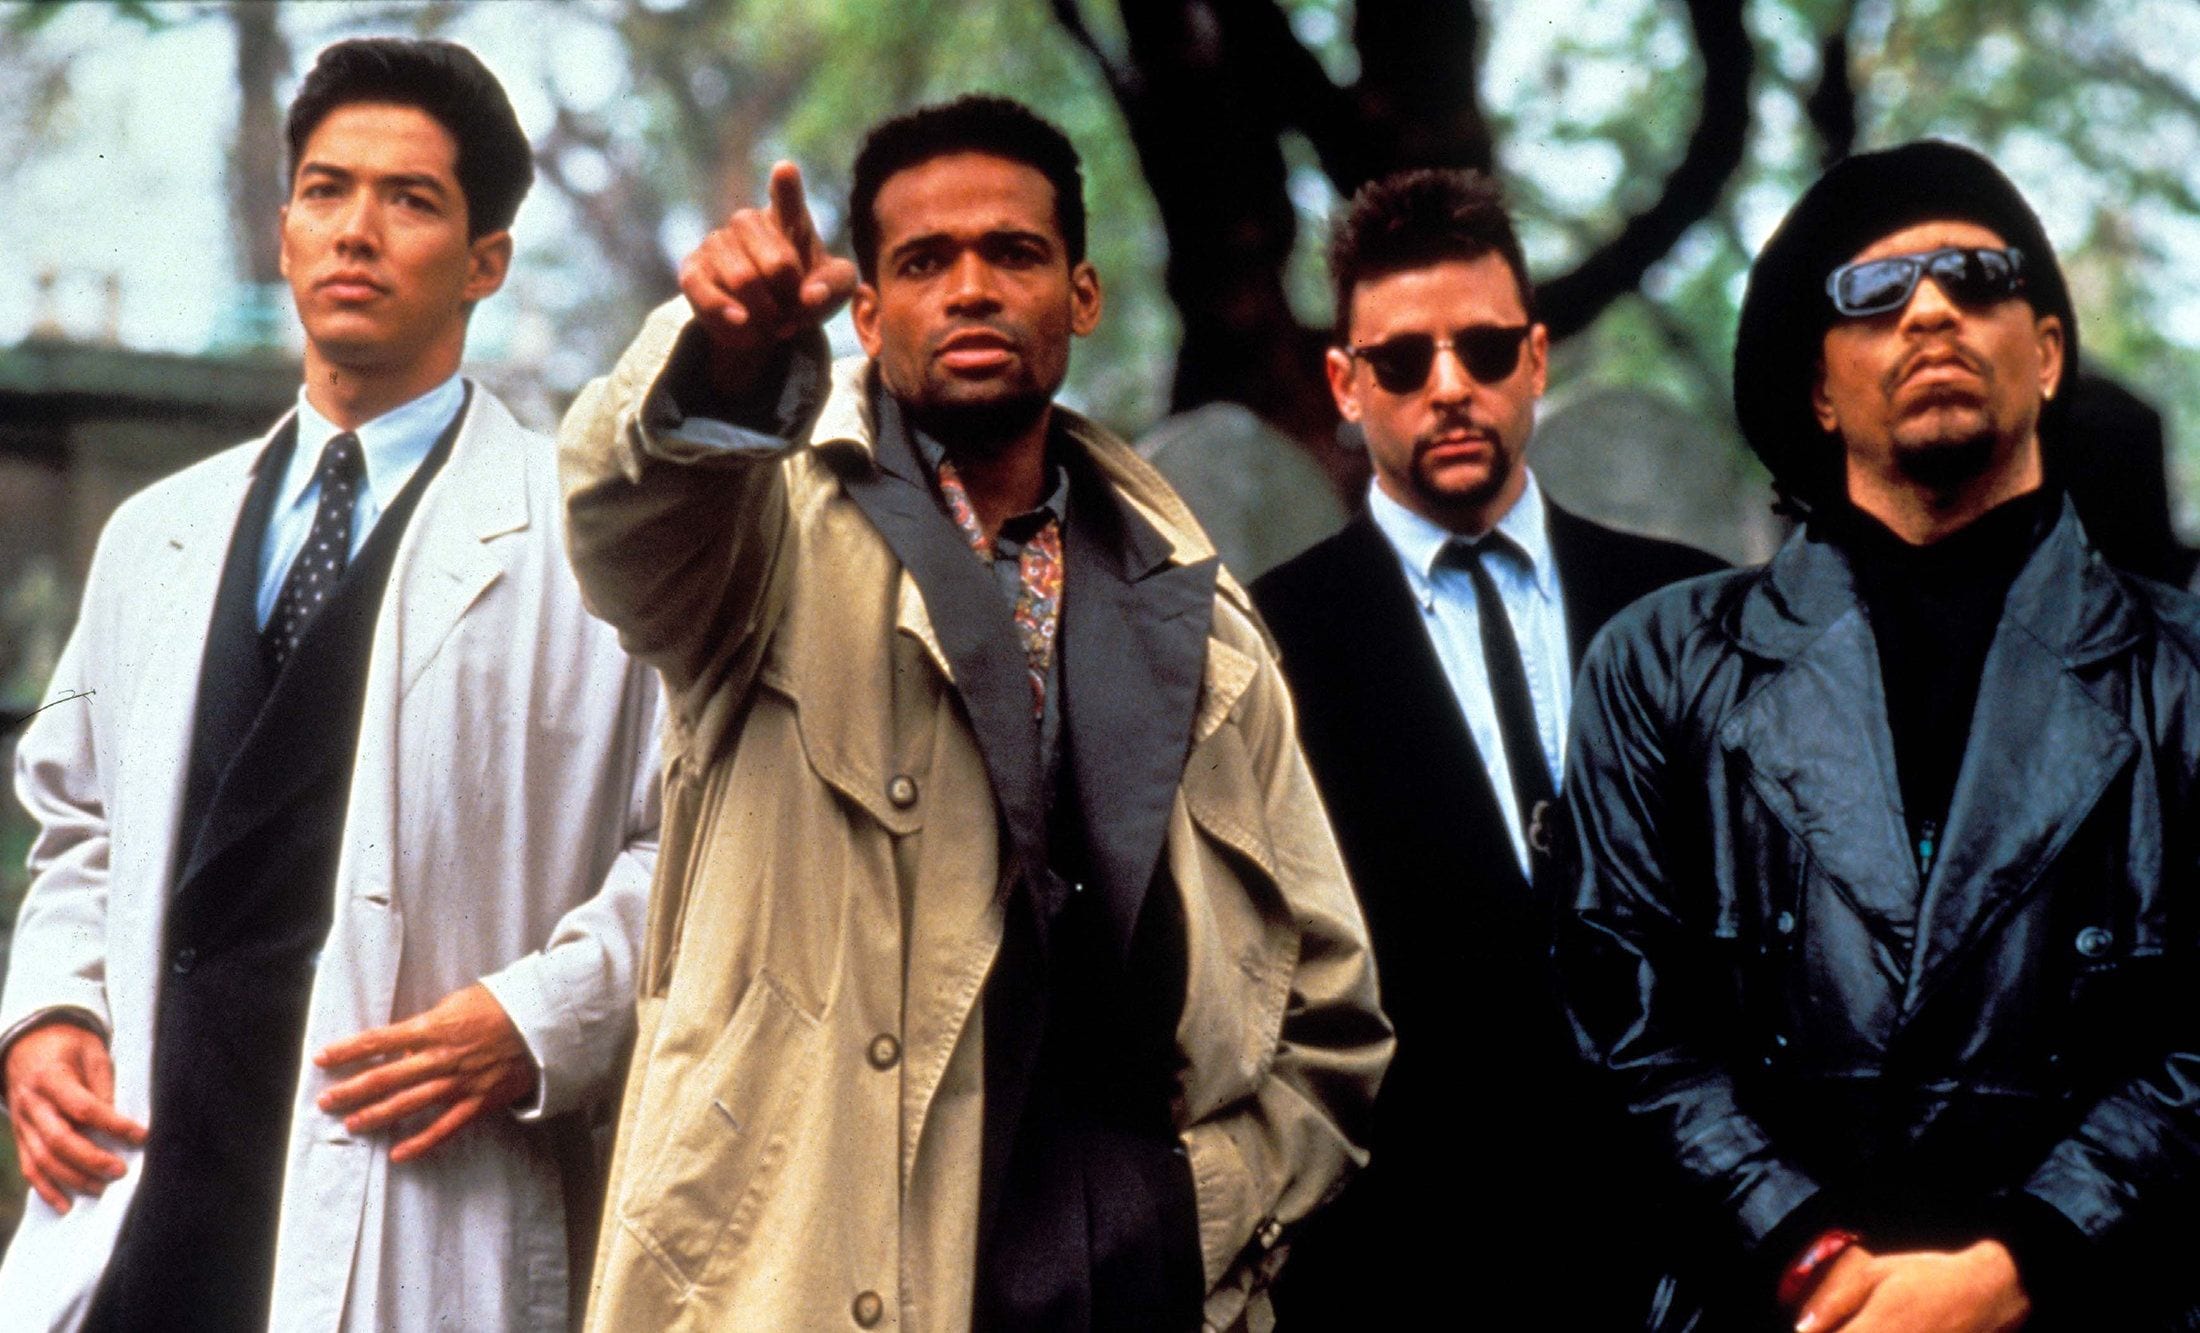 Contemporary Urbanity and Blackness in ‘New Jack City’